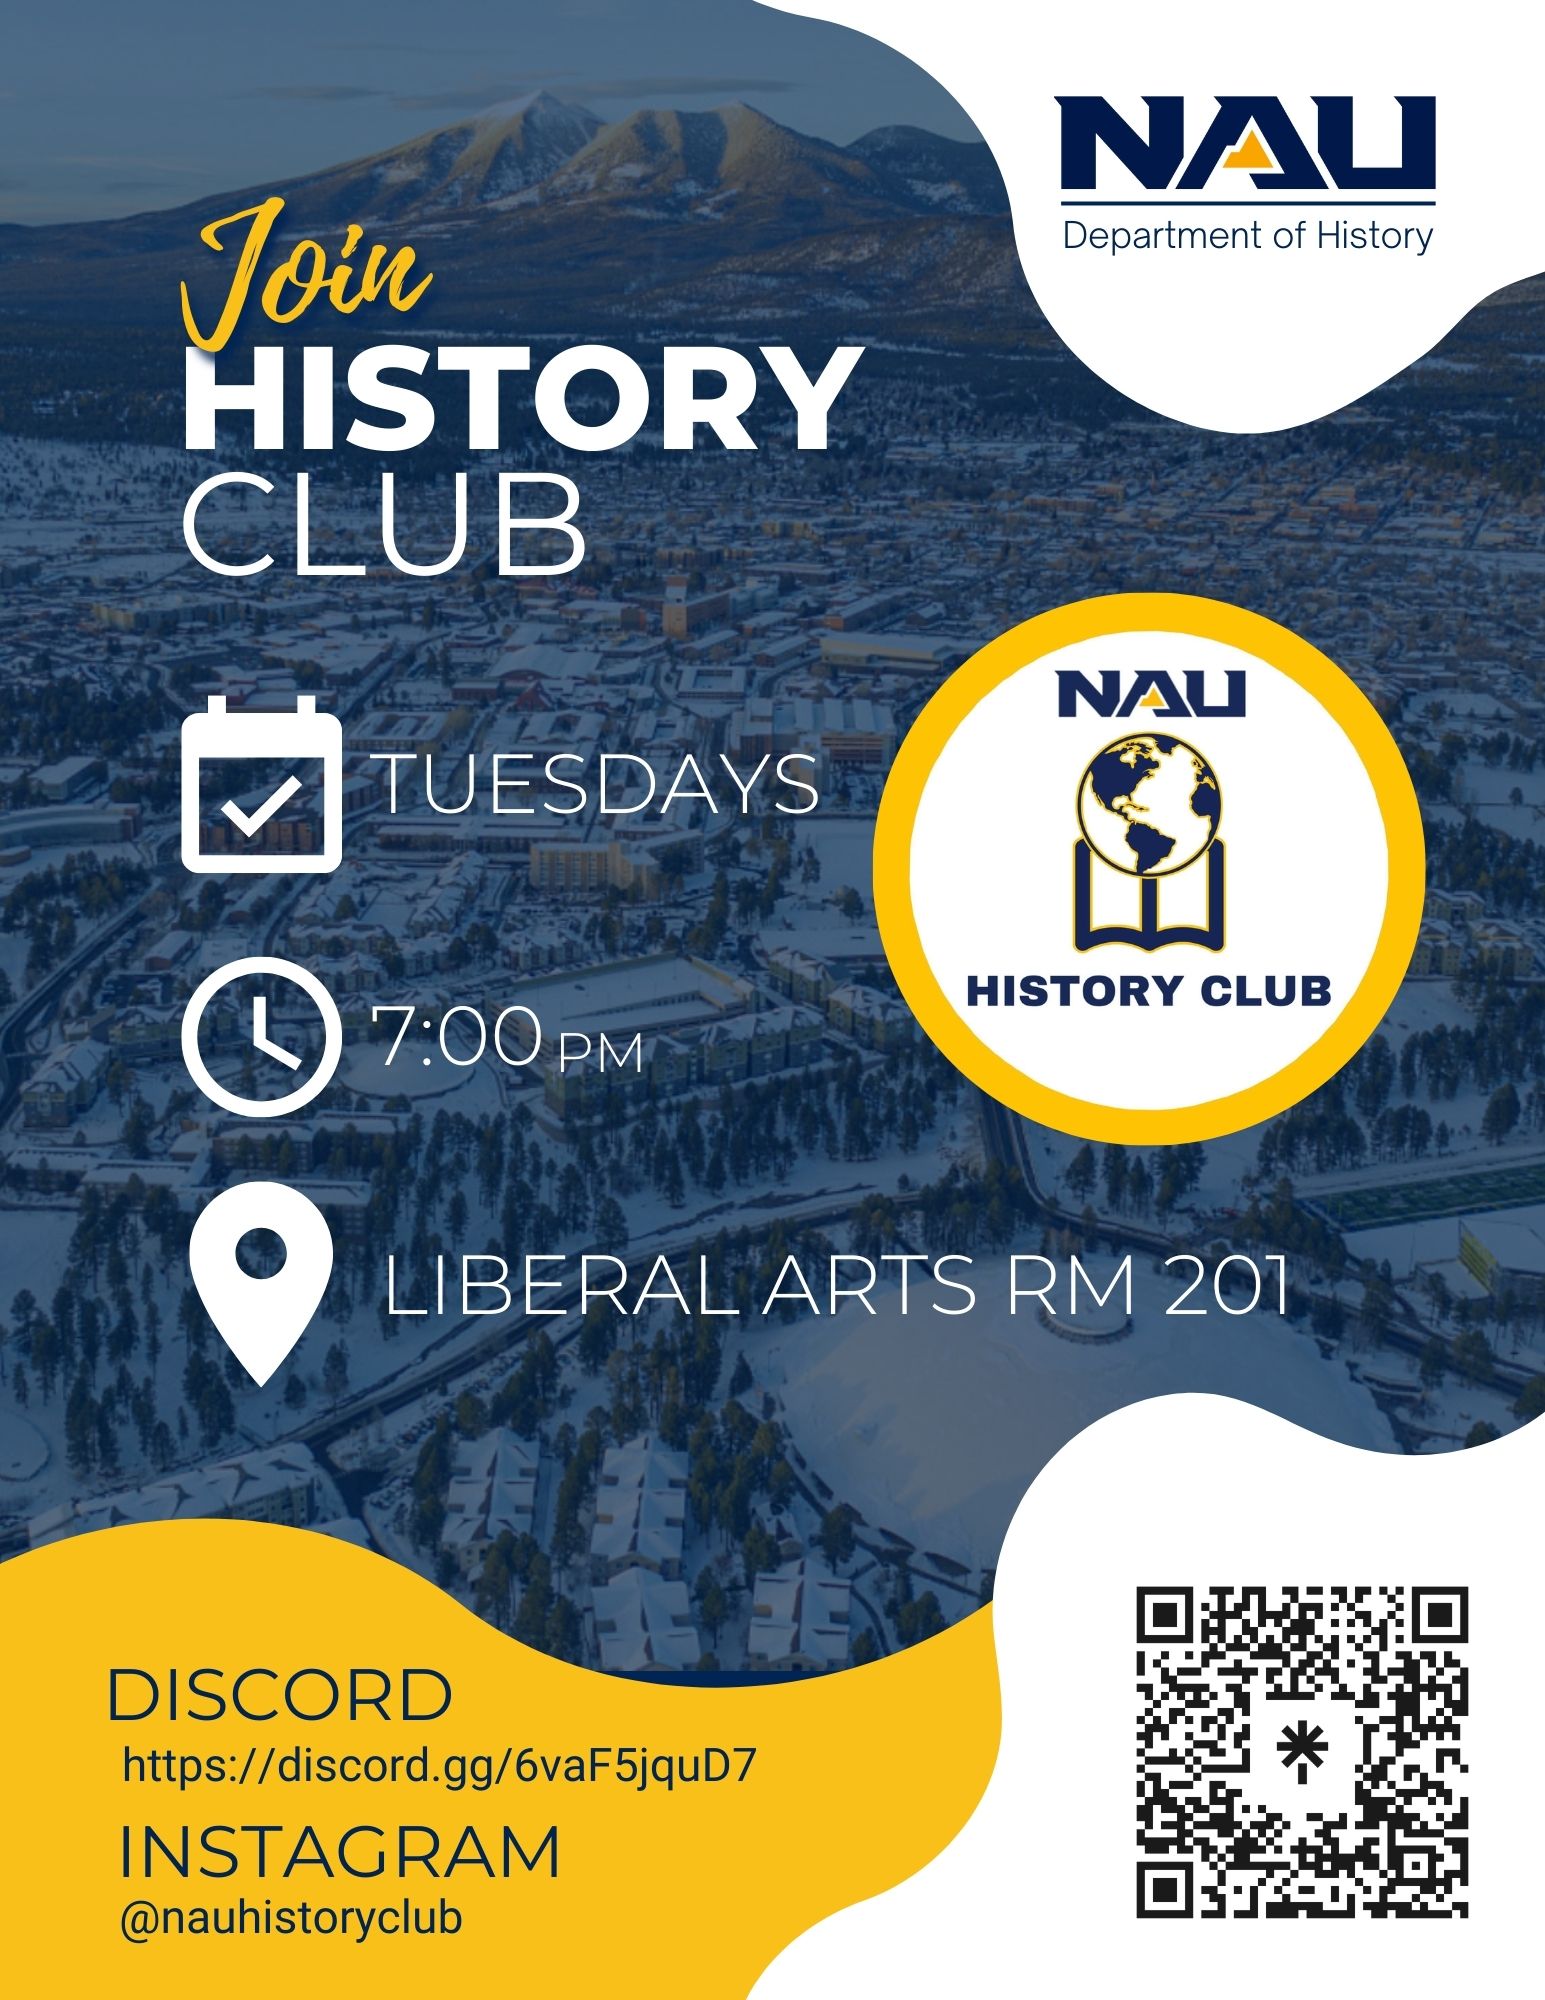 History club poster: Tuesdays at 7 PM in the Liberal Arts building, Room 201